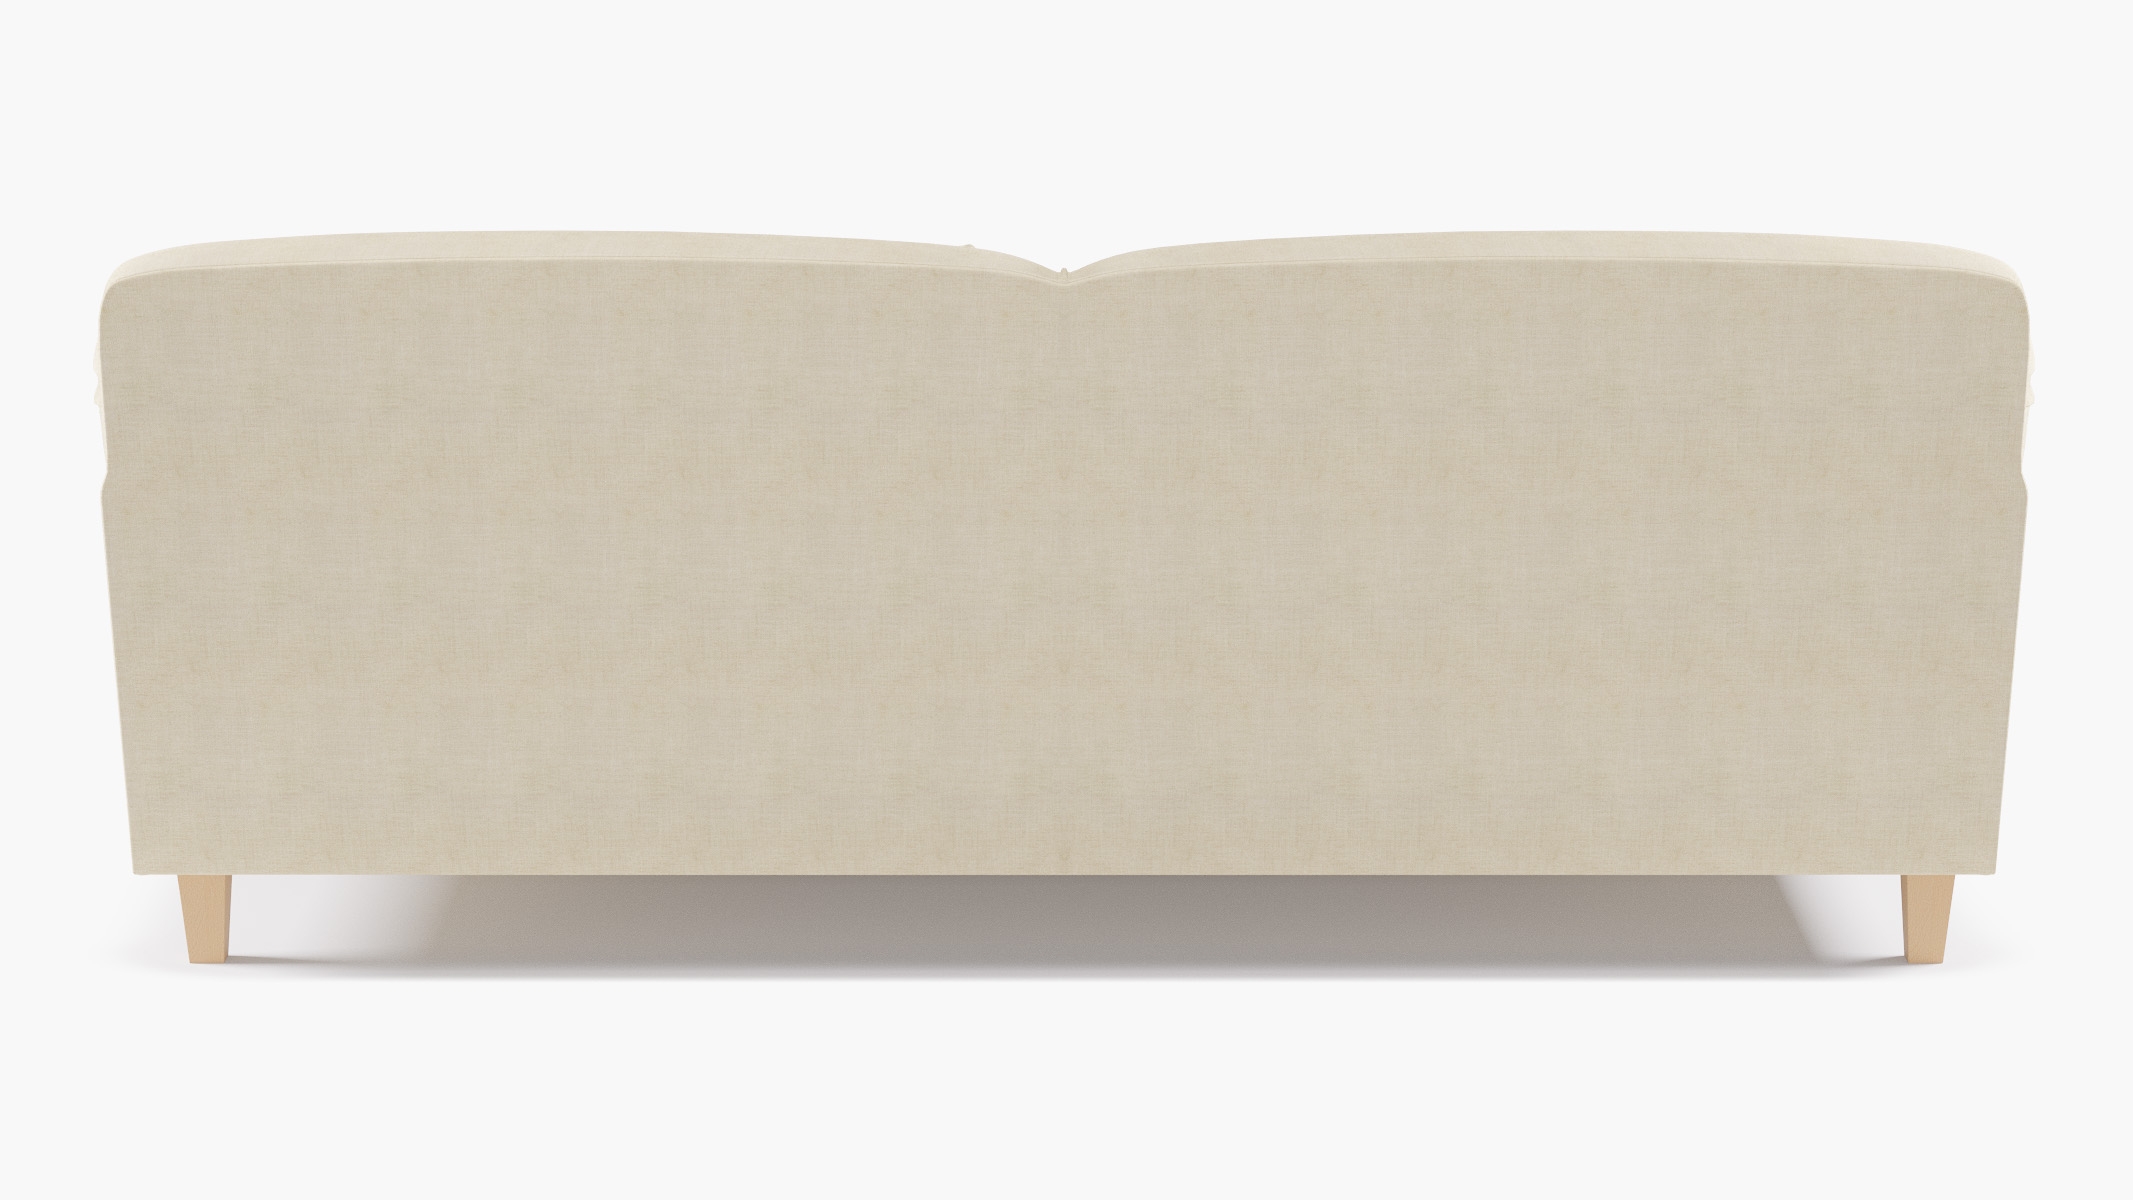 English Roll Arm Sofa, Talc Everyday Linen, Natural - Image 3